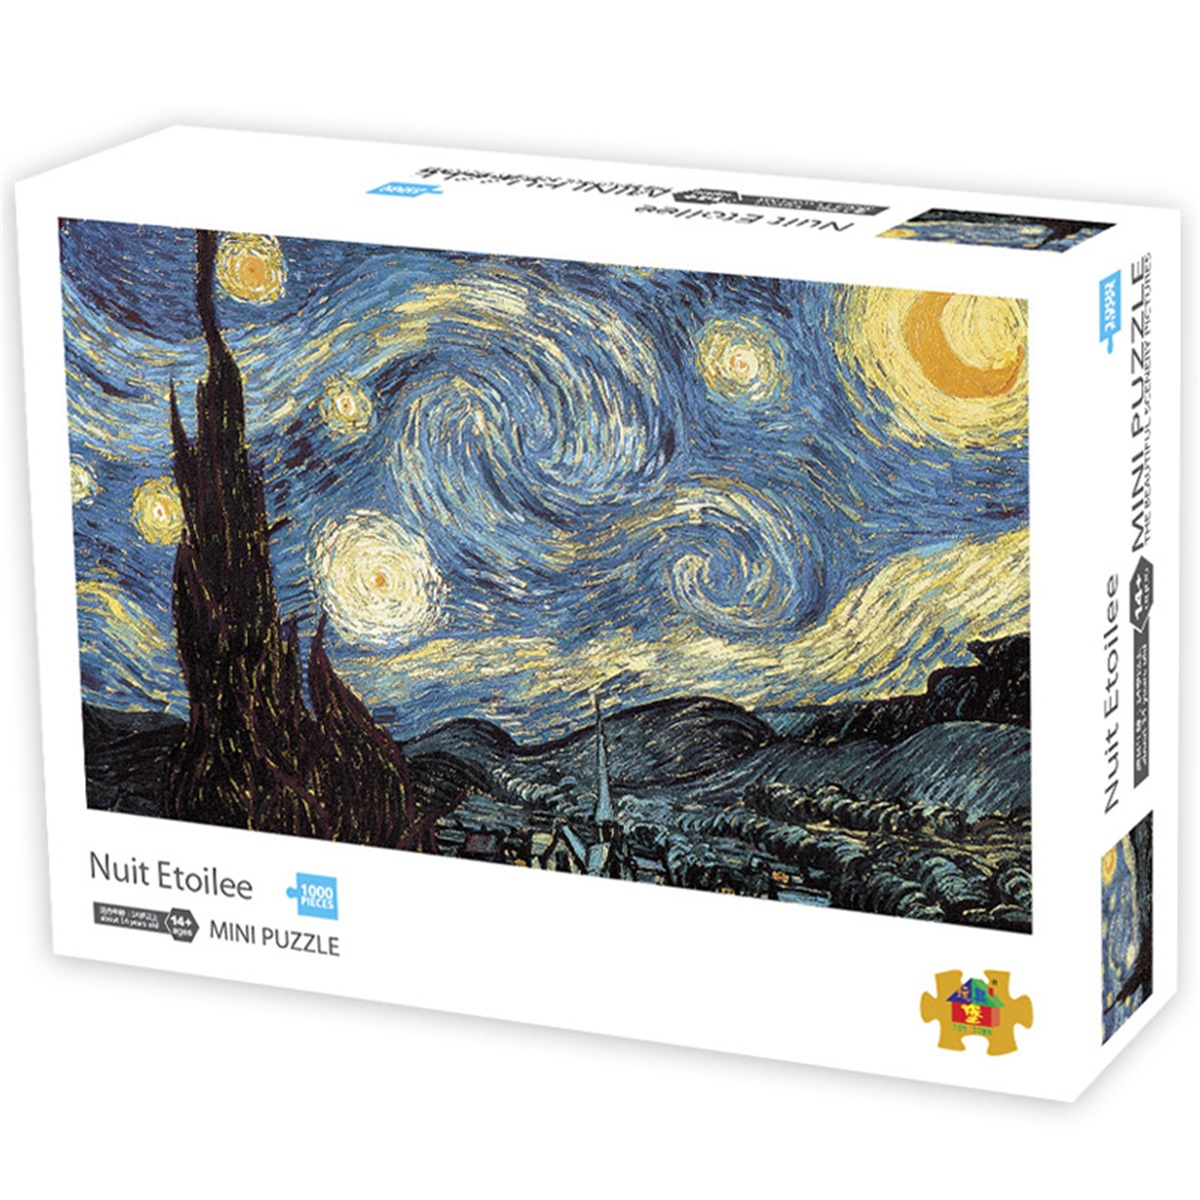 1000-Pieces-Nuit-Etoilee-DIY-Assembly-Jigsaw-Puzzles-Landscape-Picture-Educational-Games-Toy-for-Adu-1844620-8